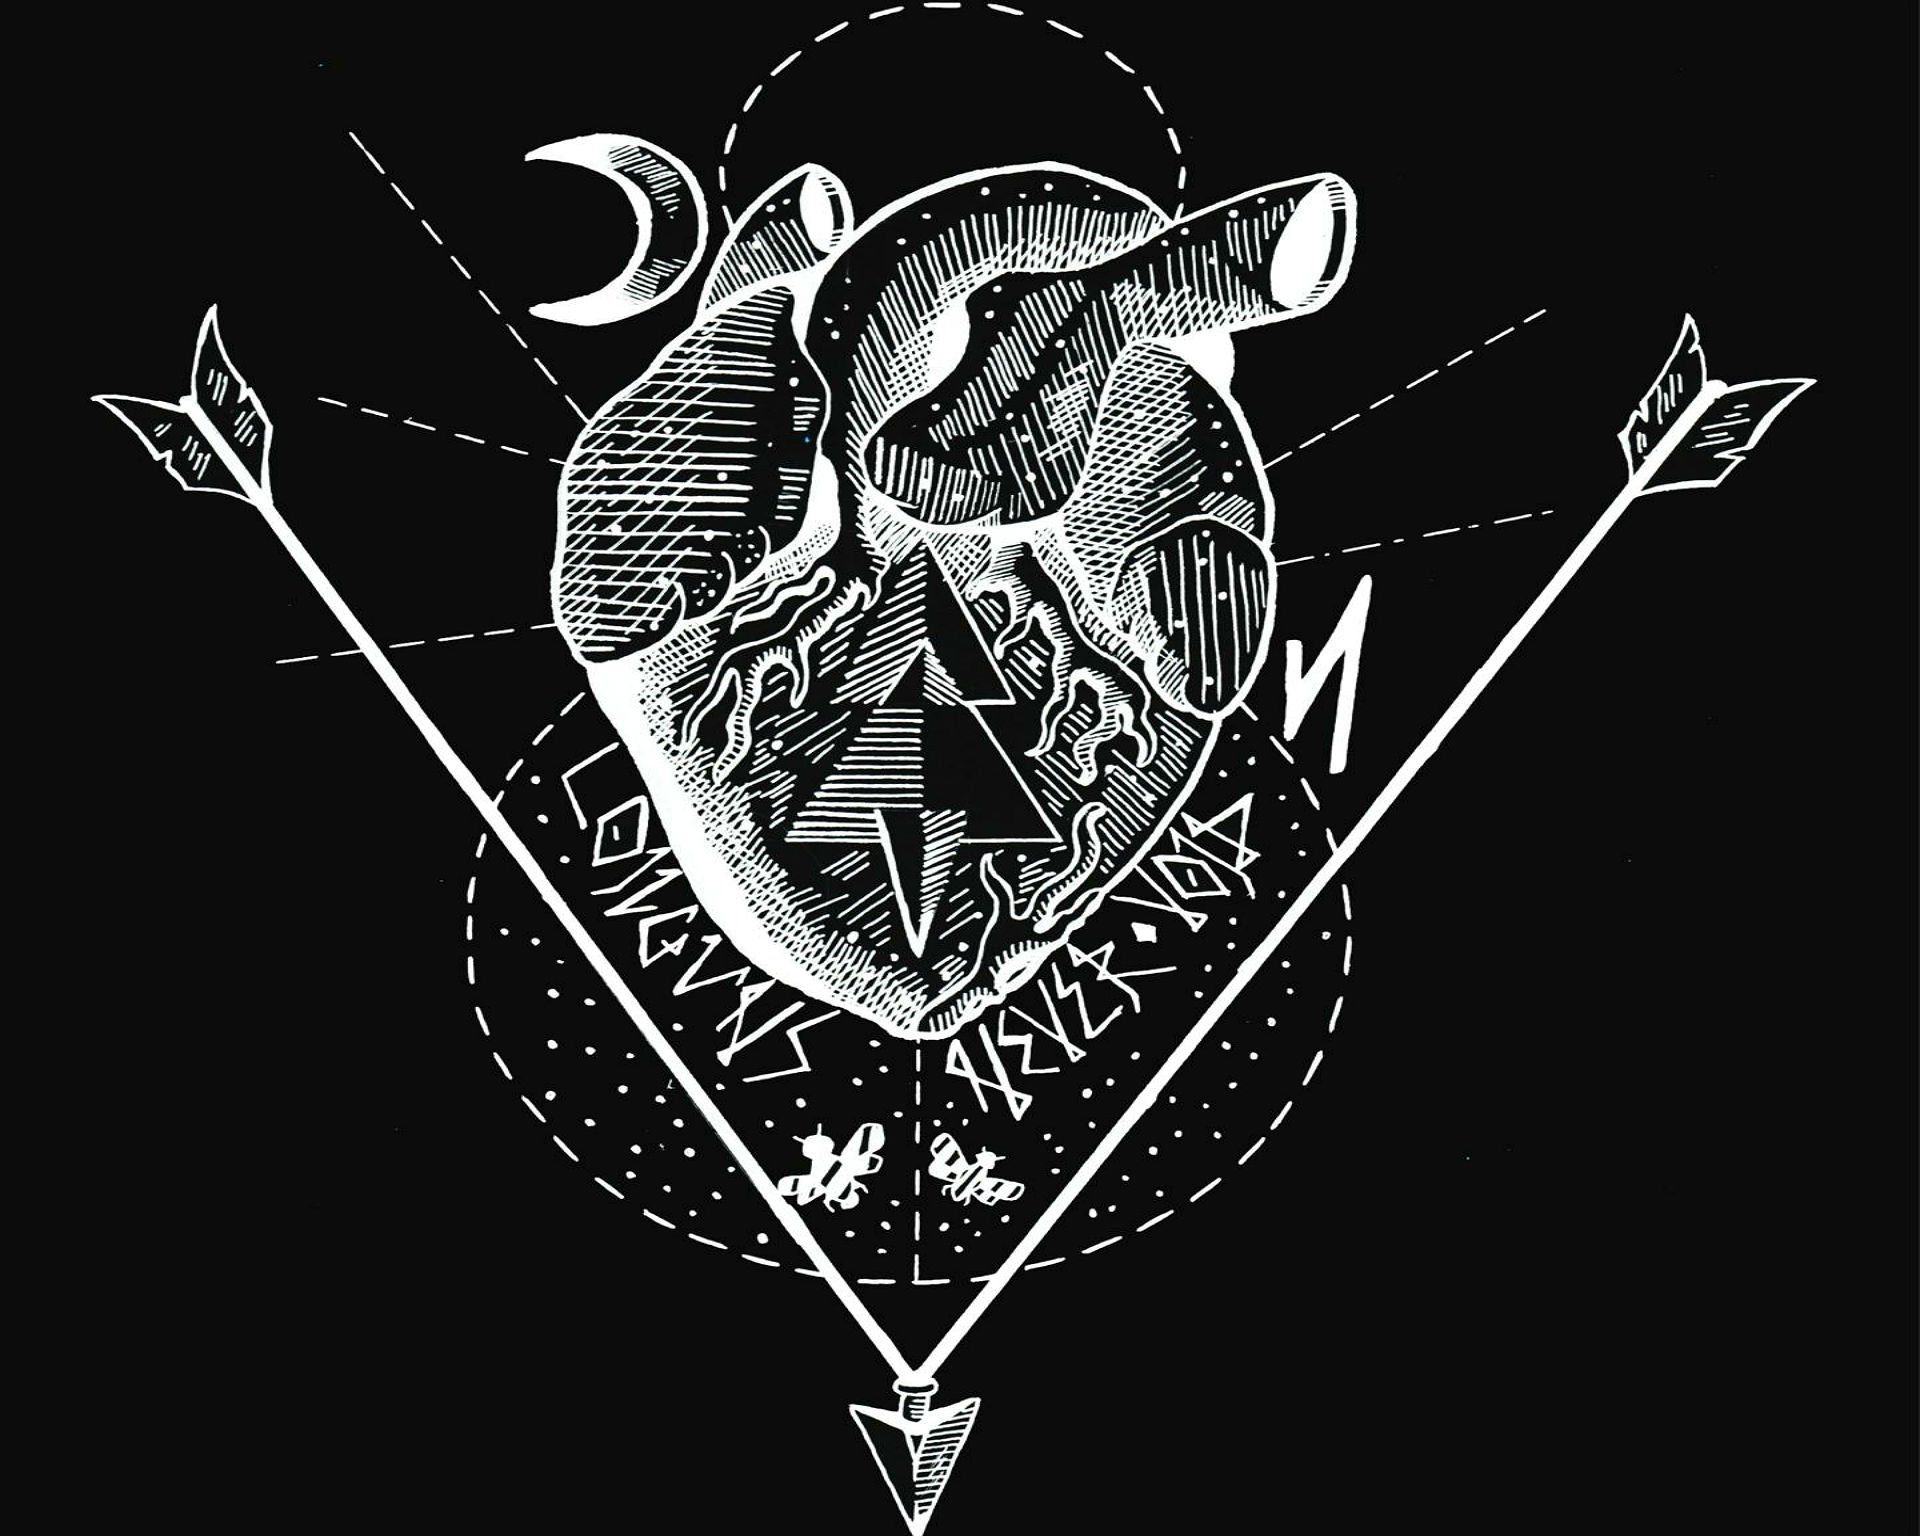 A black and white graphic of a heart with geometric shapes around it - Punk